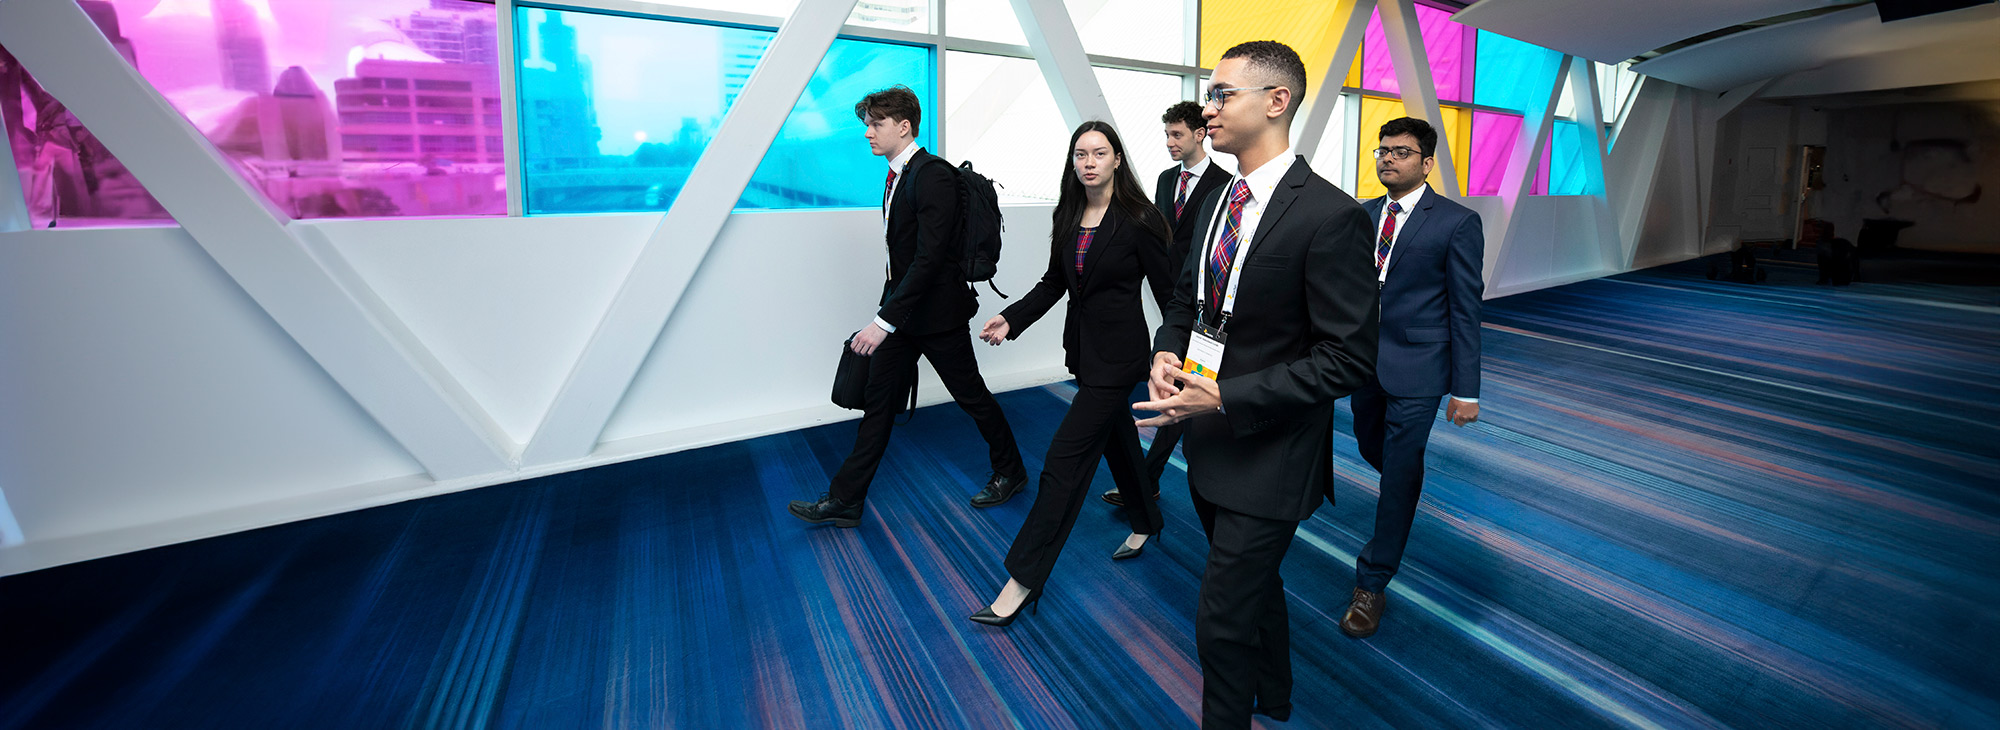 A group of students in business clothes waling purposefully down a hallway.